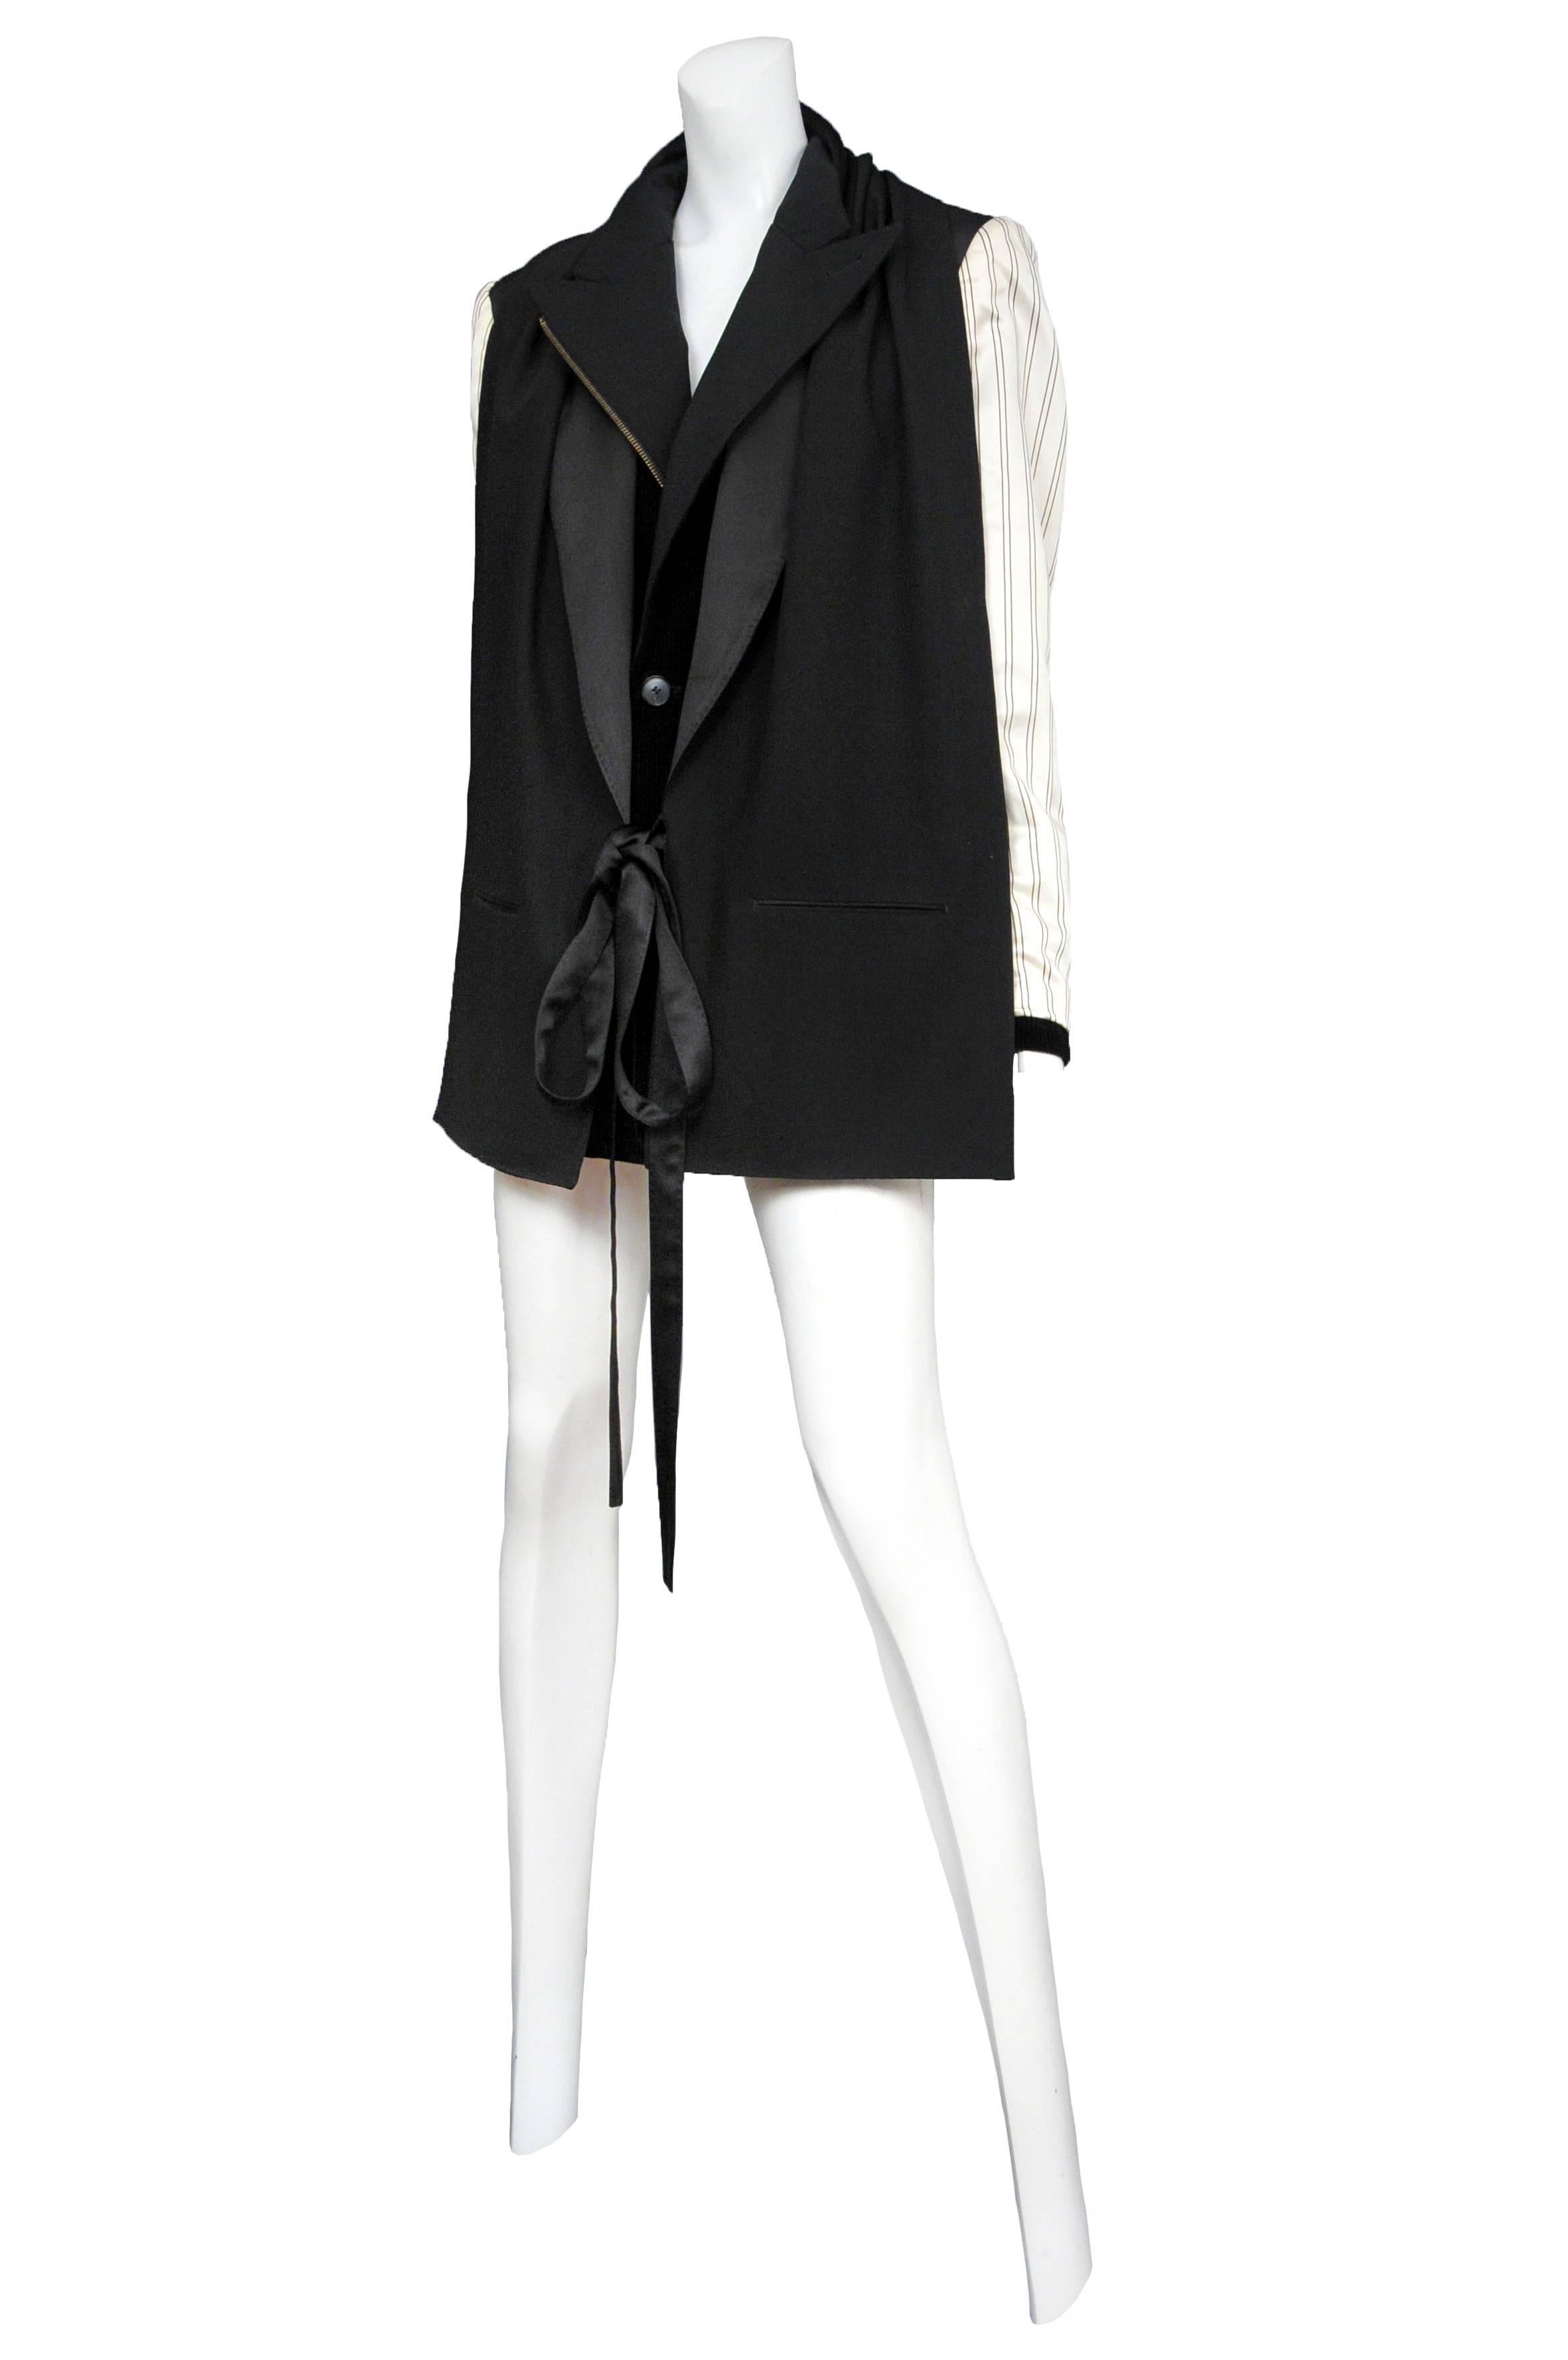 Vintage Jean Paul Gaultier black darted, ivory striped sleeve blazer featuring black corduroy trim along the front and around the vented pockets at the chest. The blazer comes with a matching shawl featuring vented pockets and a satin tie that holds